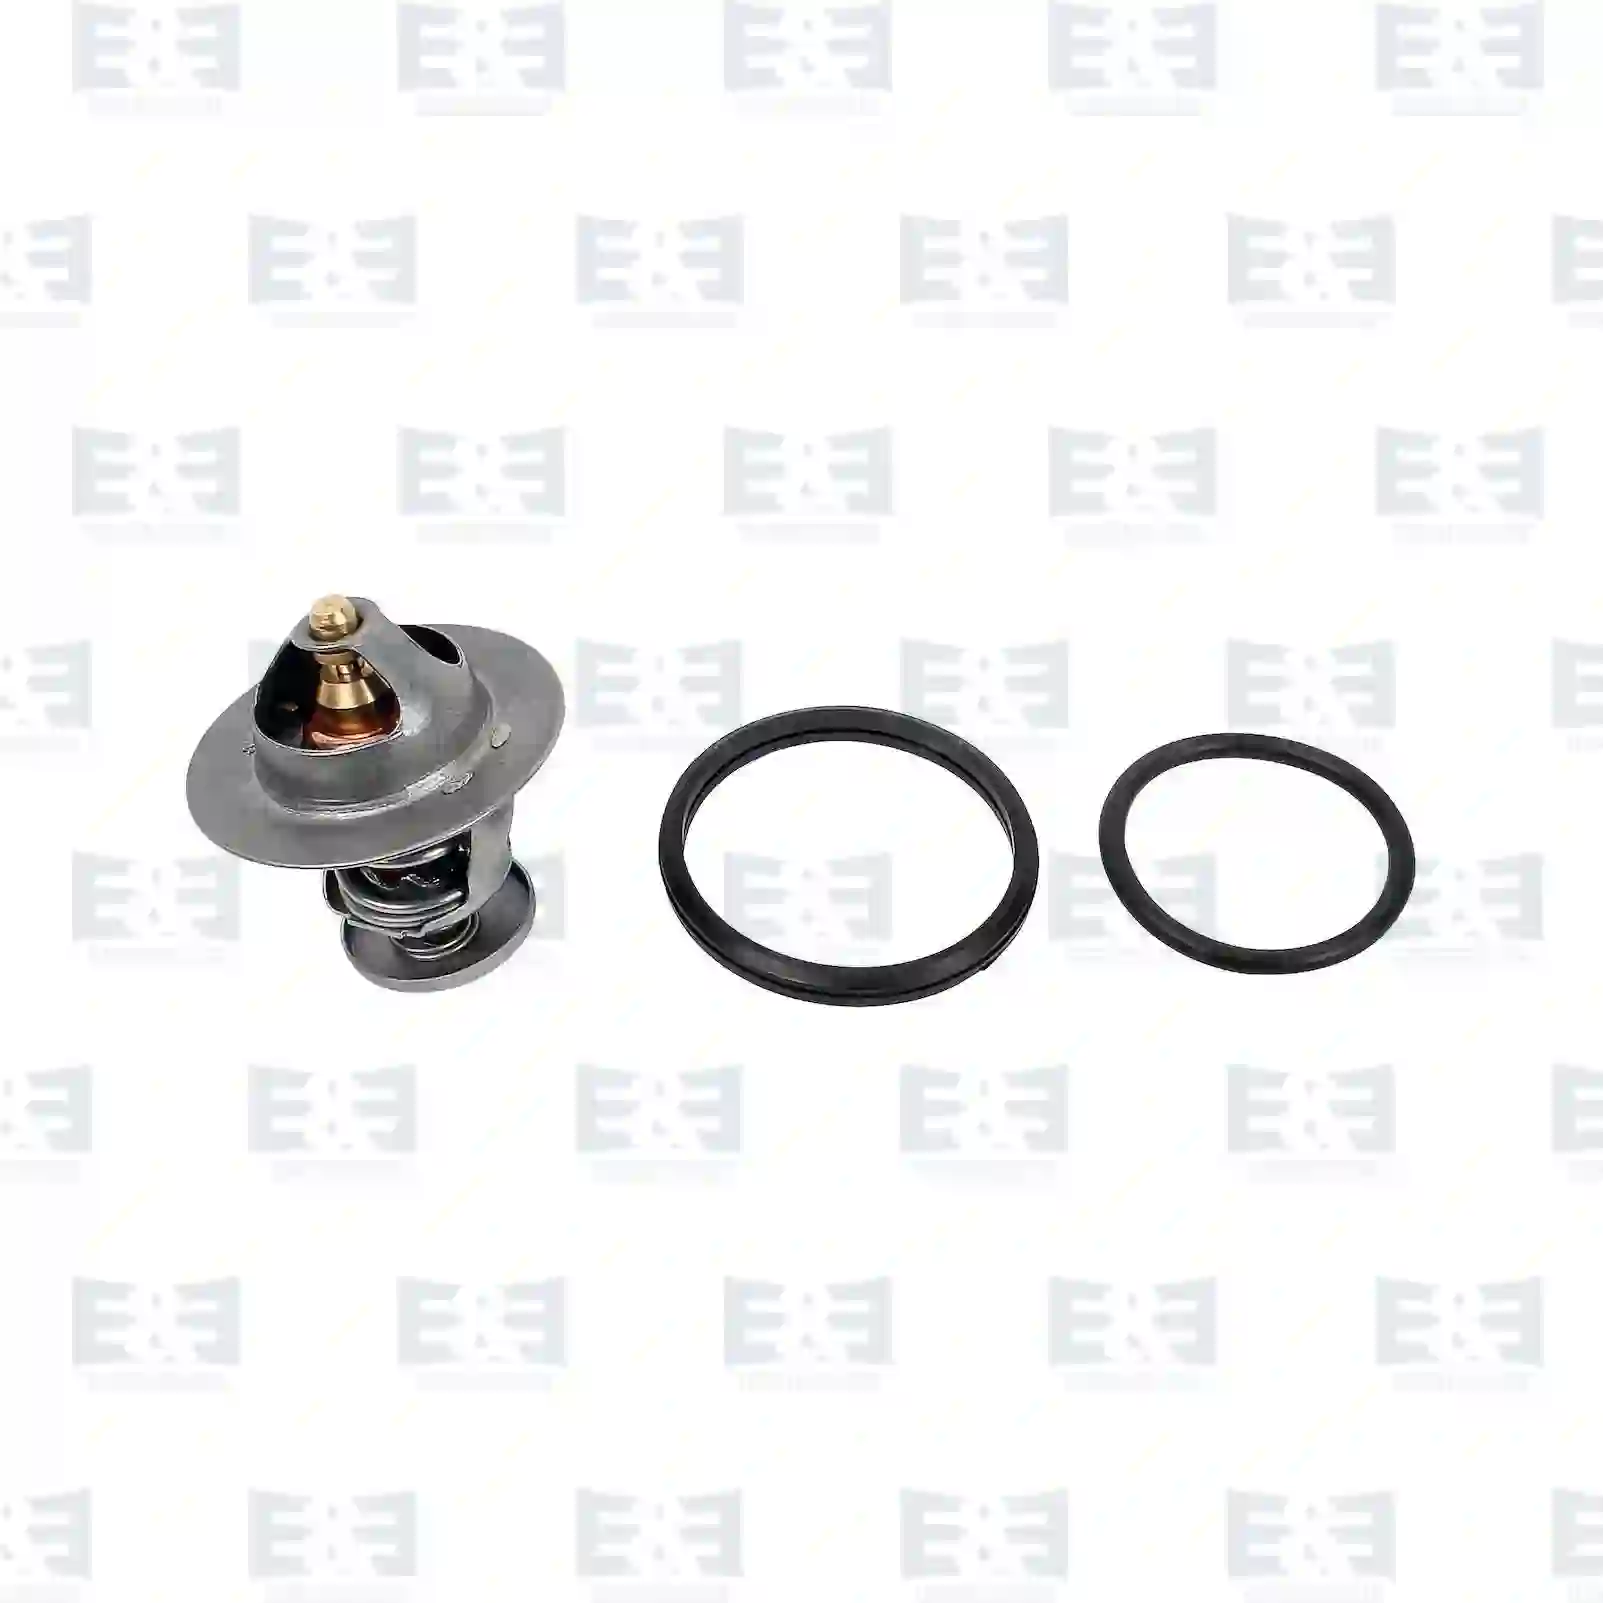 Thermostat, 2E2203787, 1731782, BK3Q-8A586-AA, BK3Q-8A586-AB, BK3Q-8A586-AC ||  2E2203787 E&E Truck Spare Parts | Truck Spare Parts, Auotomotive Spare Parts Thermostat, 2E2203787, 1731782, BK3Q-8A586-AA, BK3Q-8A586-AB, BK3Q-8A586-AC ||  2E2203787 E&E Truck Spare Parts | Truck Spare Parts, Auotomotive Spare Parts